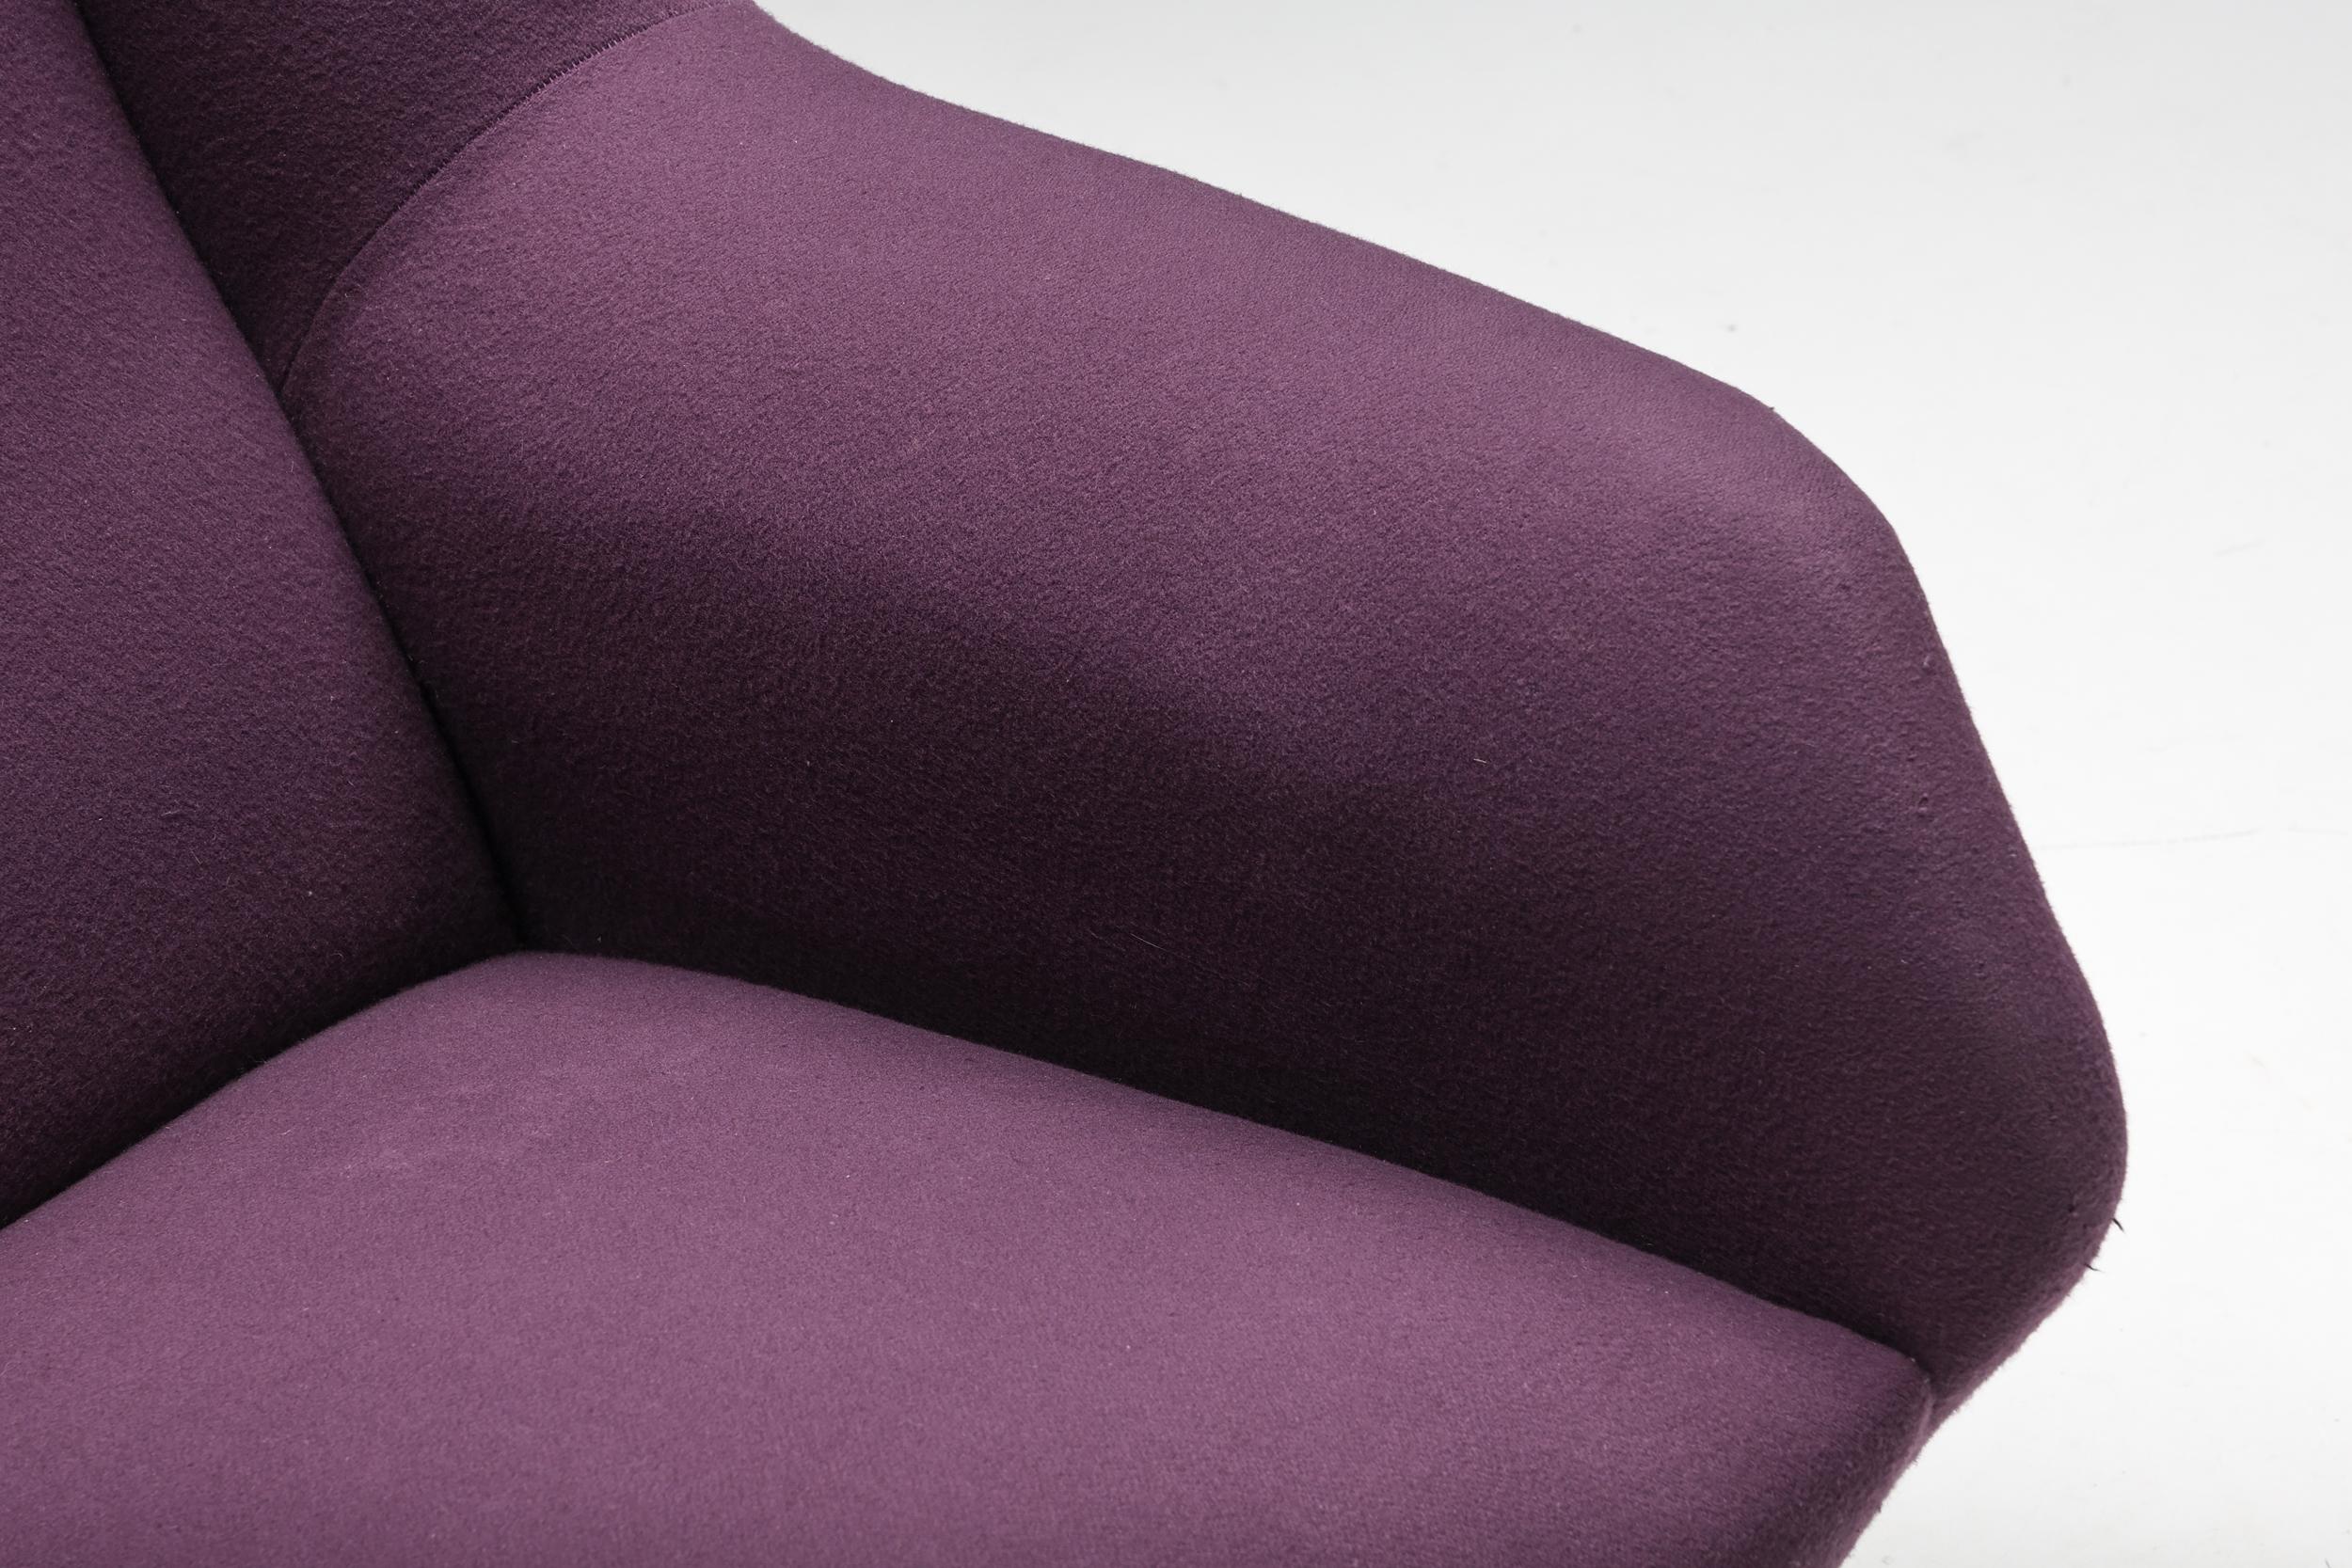 Ico Parisi Easy Chairs with Purple Upholstery, 1950s For Sale 2